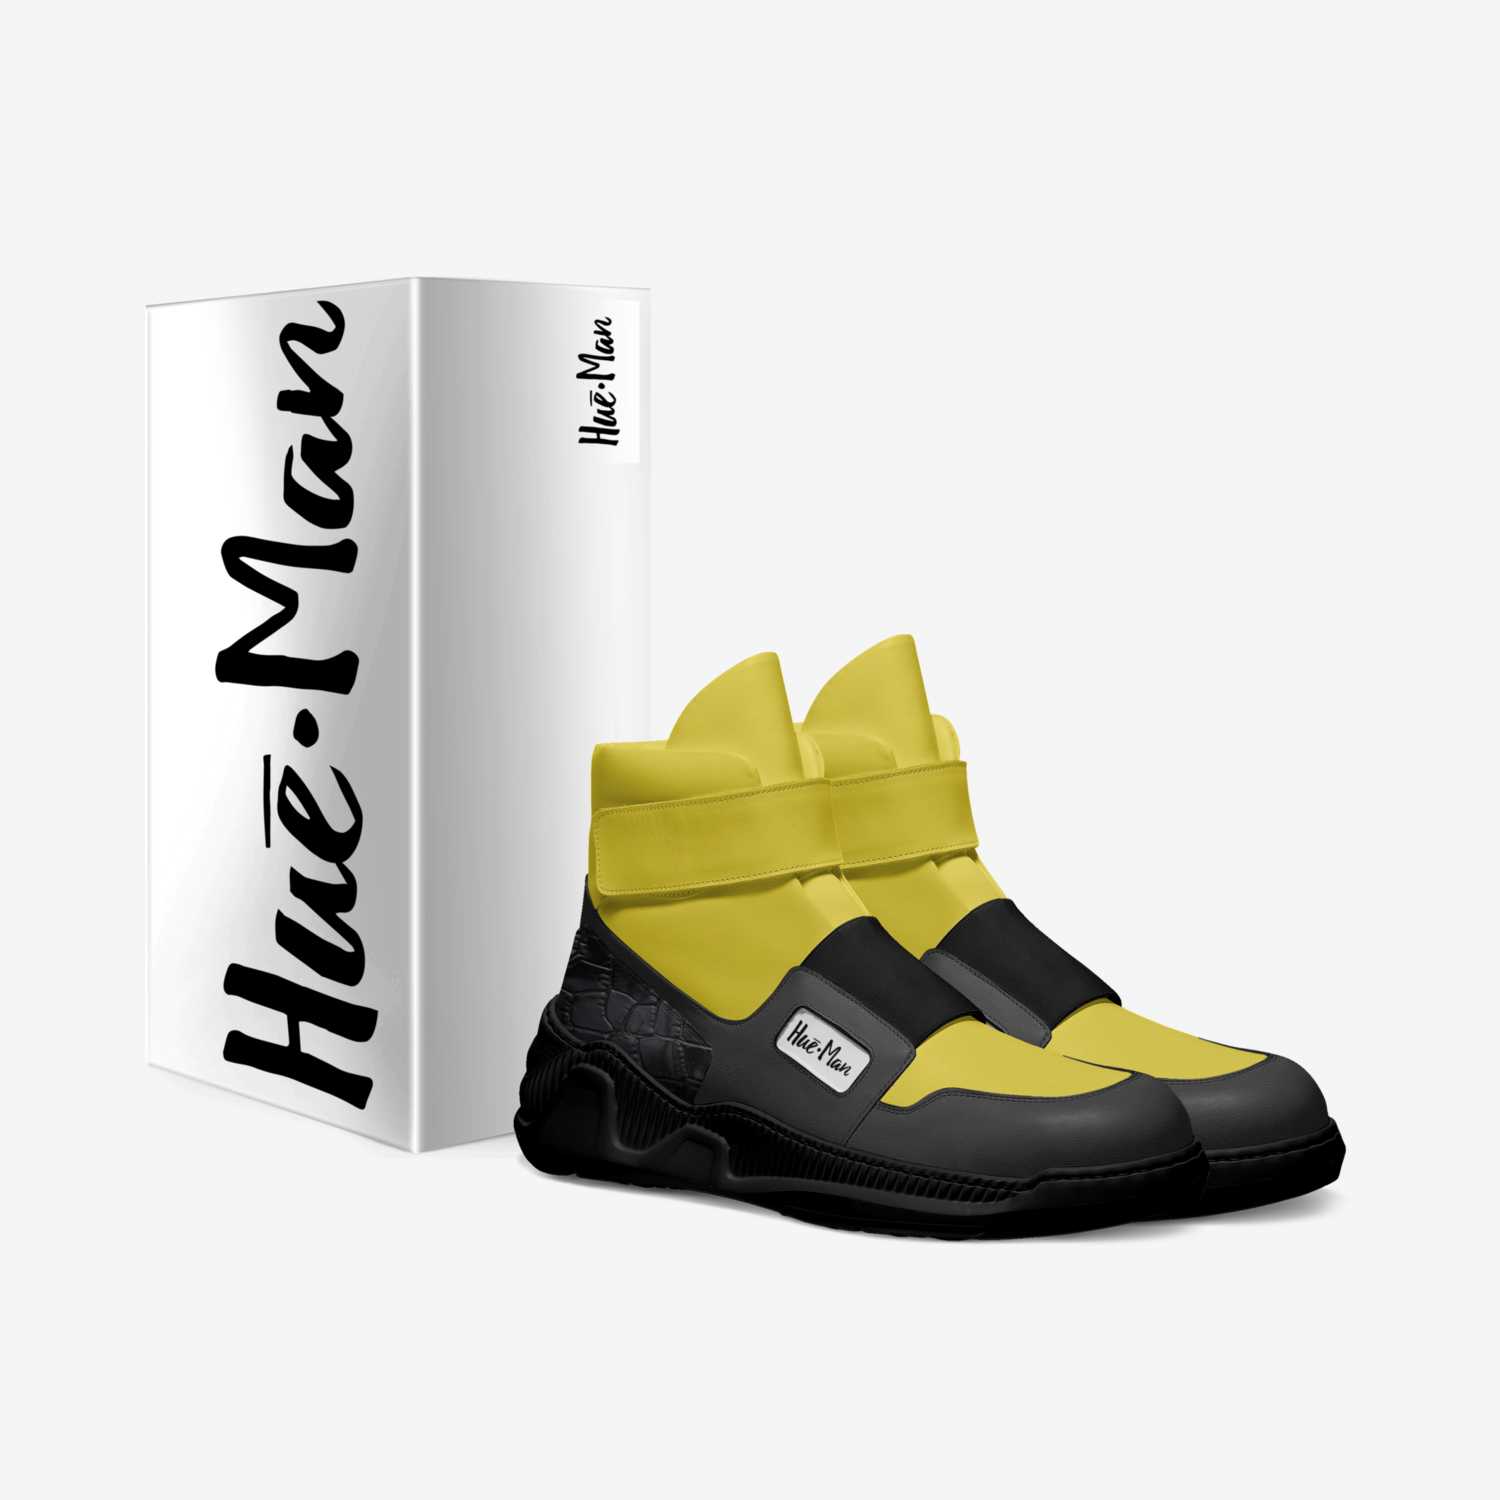 Hue-man HT Boot custom made in Italy shoes by Day1 J | Box view